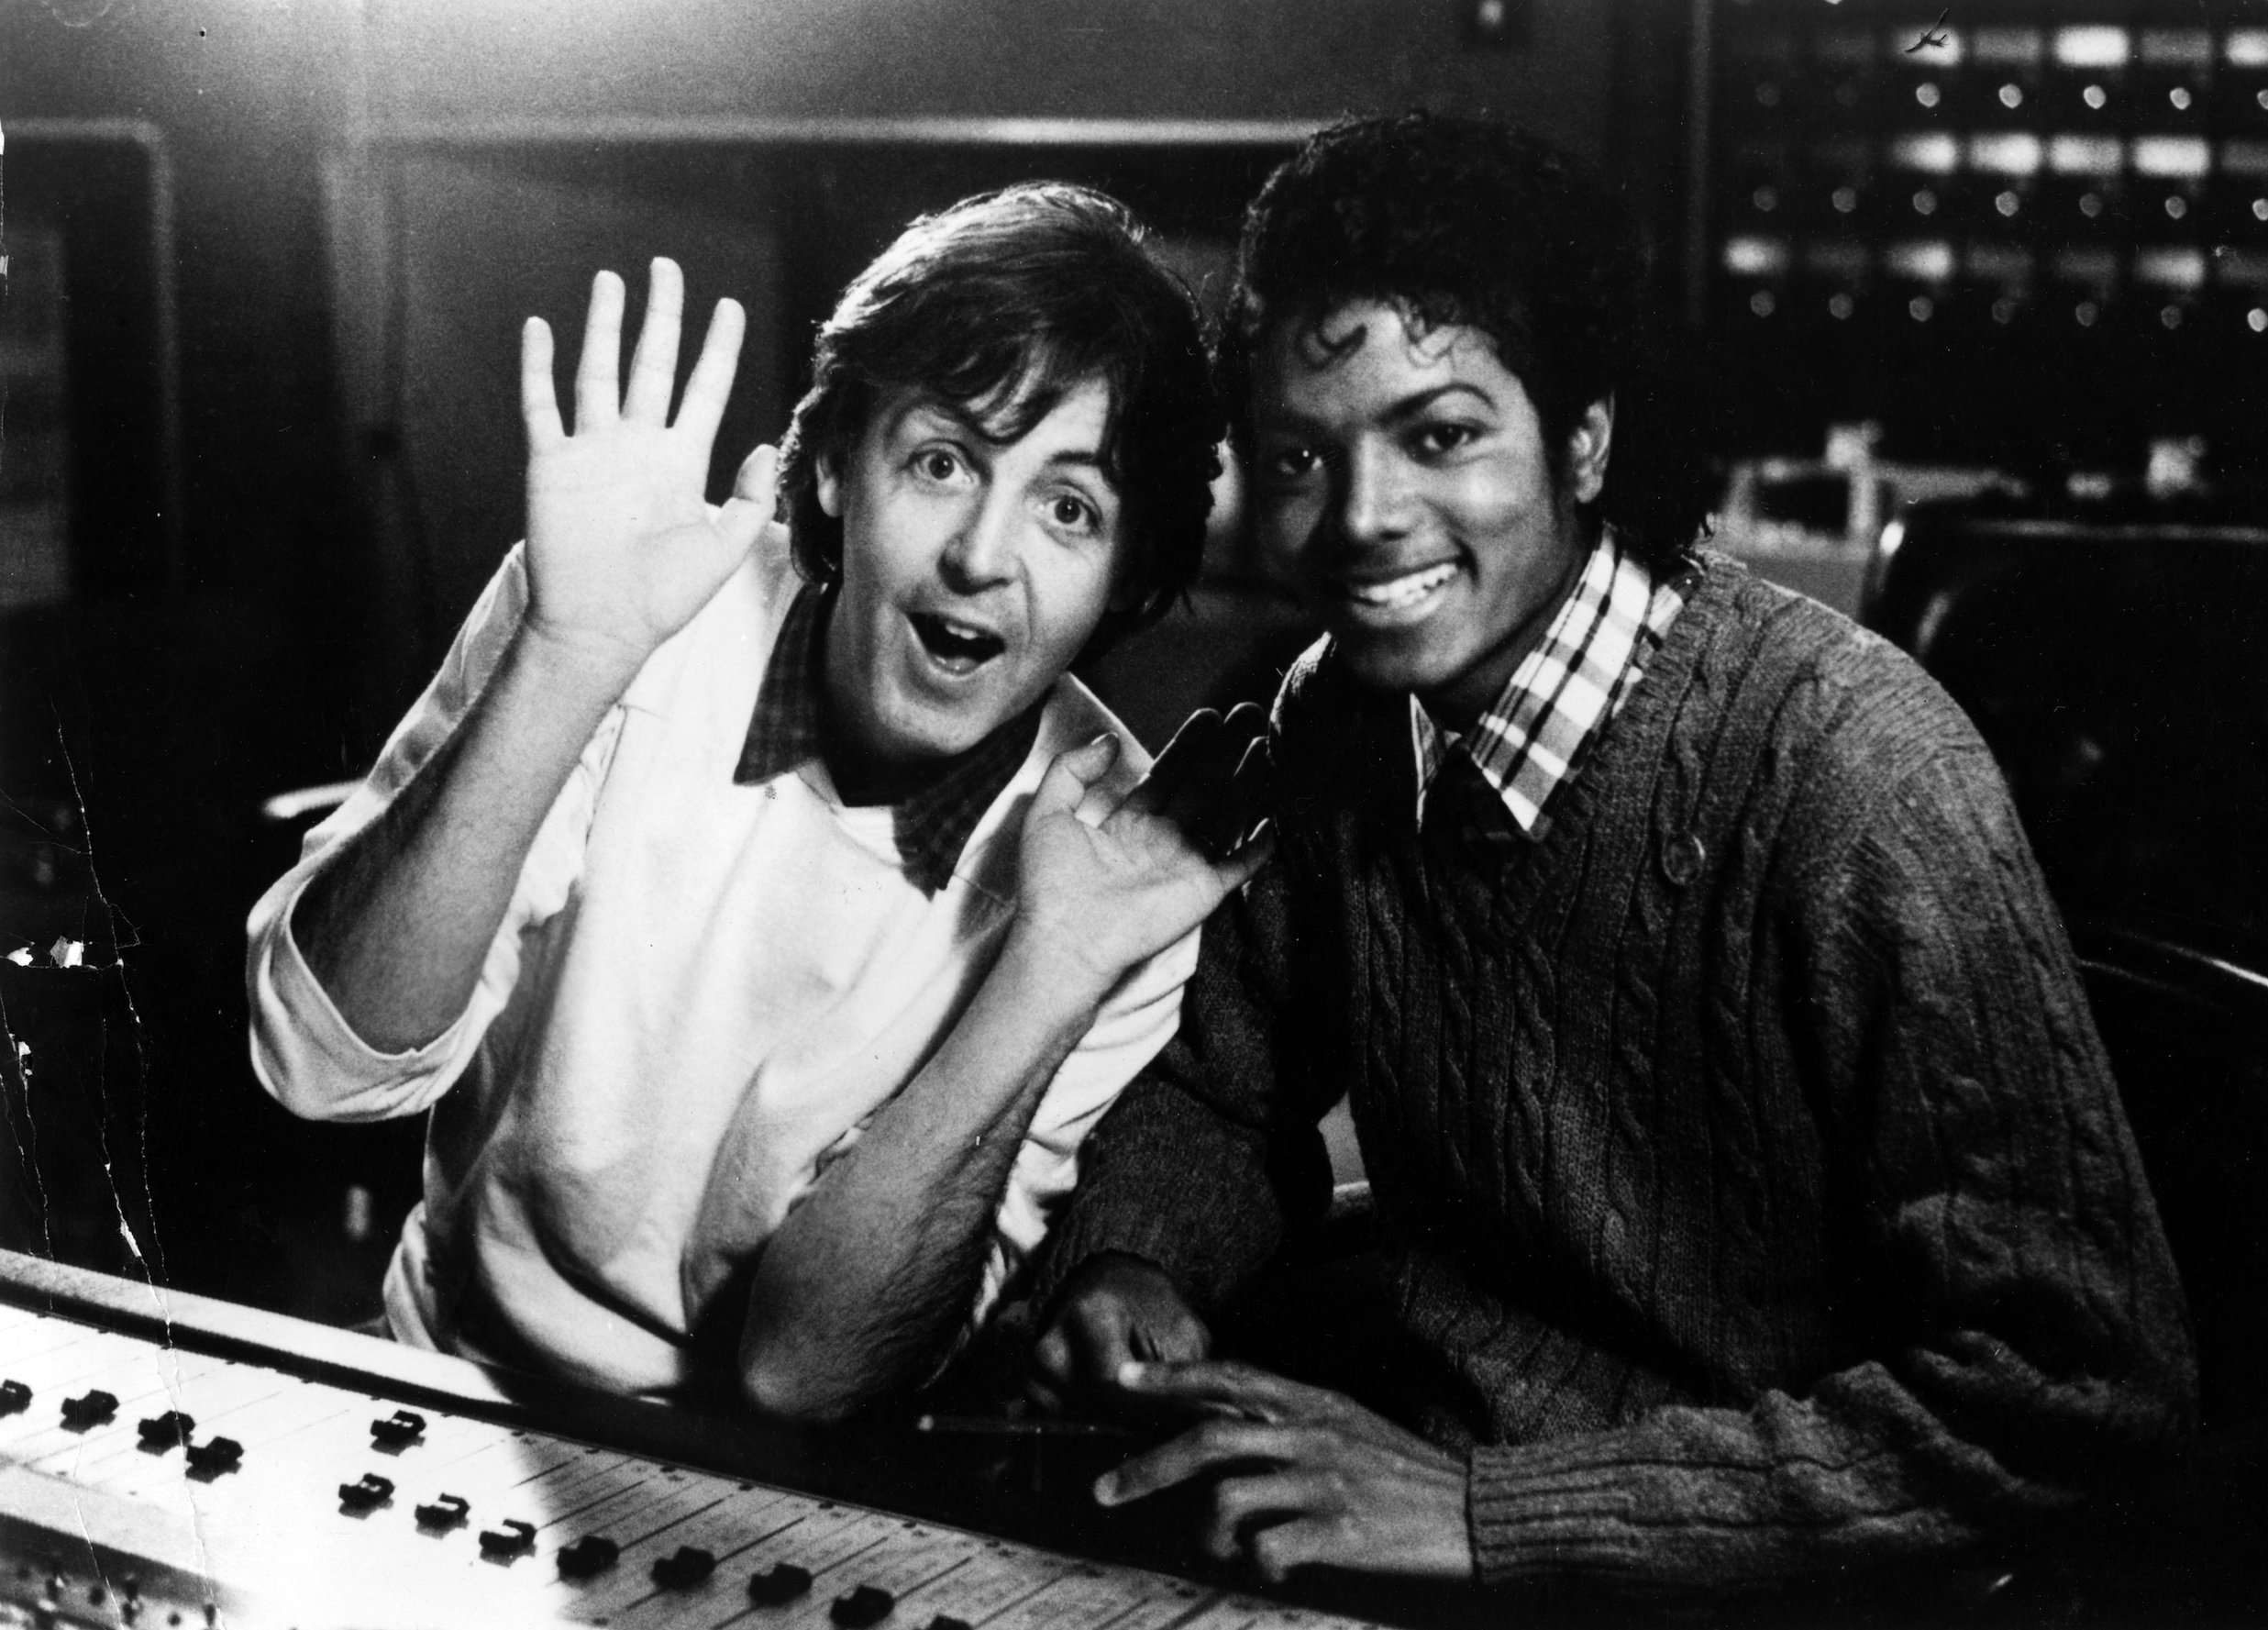 Paul McCartney and Michael Jackson collaborating in the studio